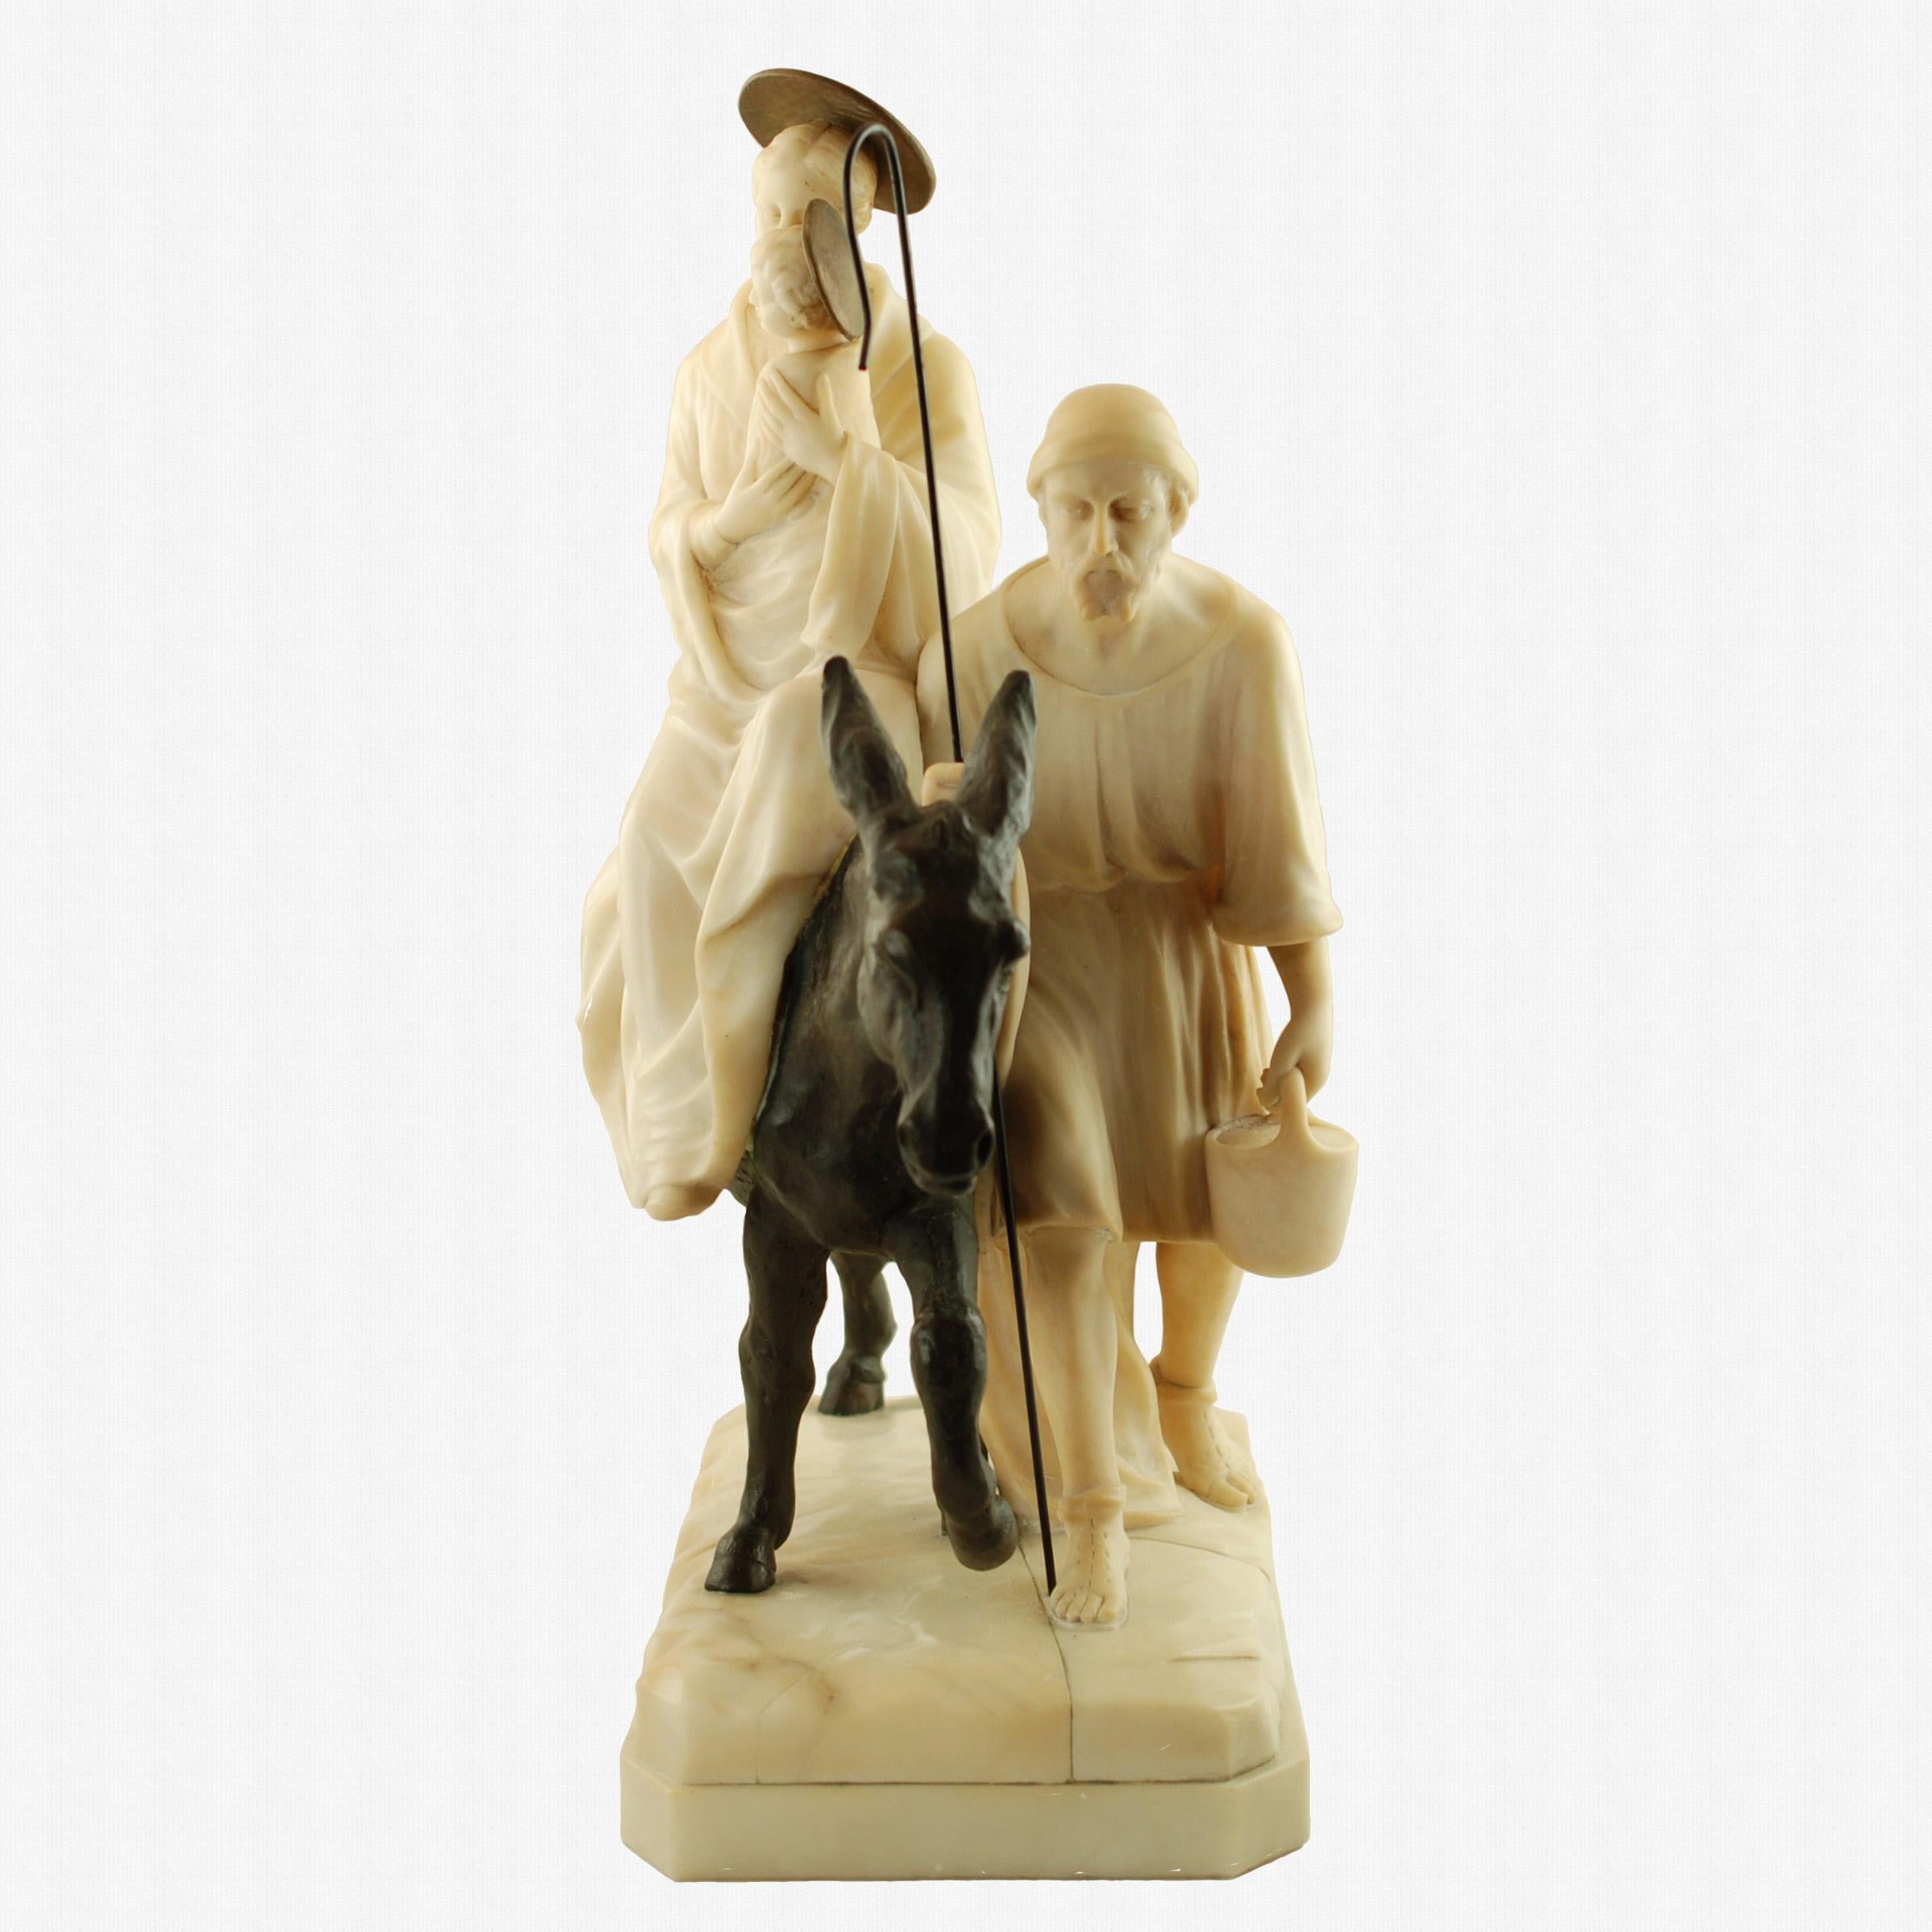 This alabaster, bronze and marble figural group was created by highly regarded Italian sculptor Emilio P. Fiaschi (1858 – 1941).  The sculpture depicts the Holy Family's Flight into Egypt and has been finished with the skill and sensitivity